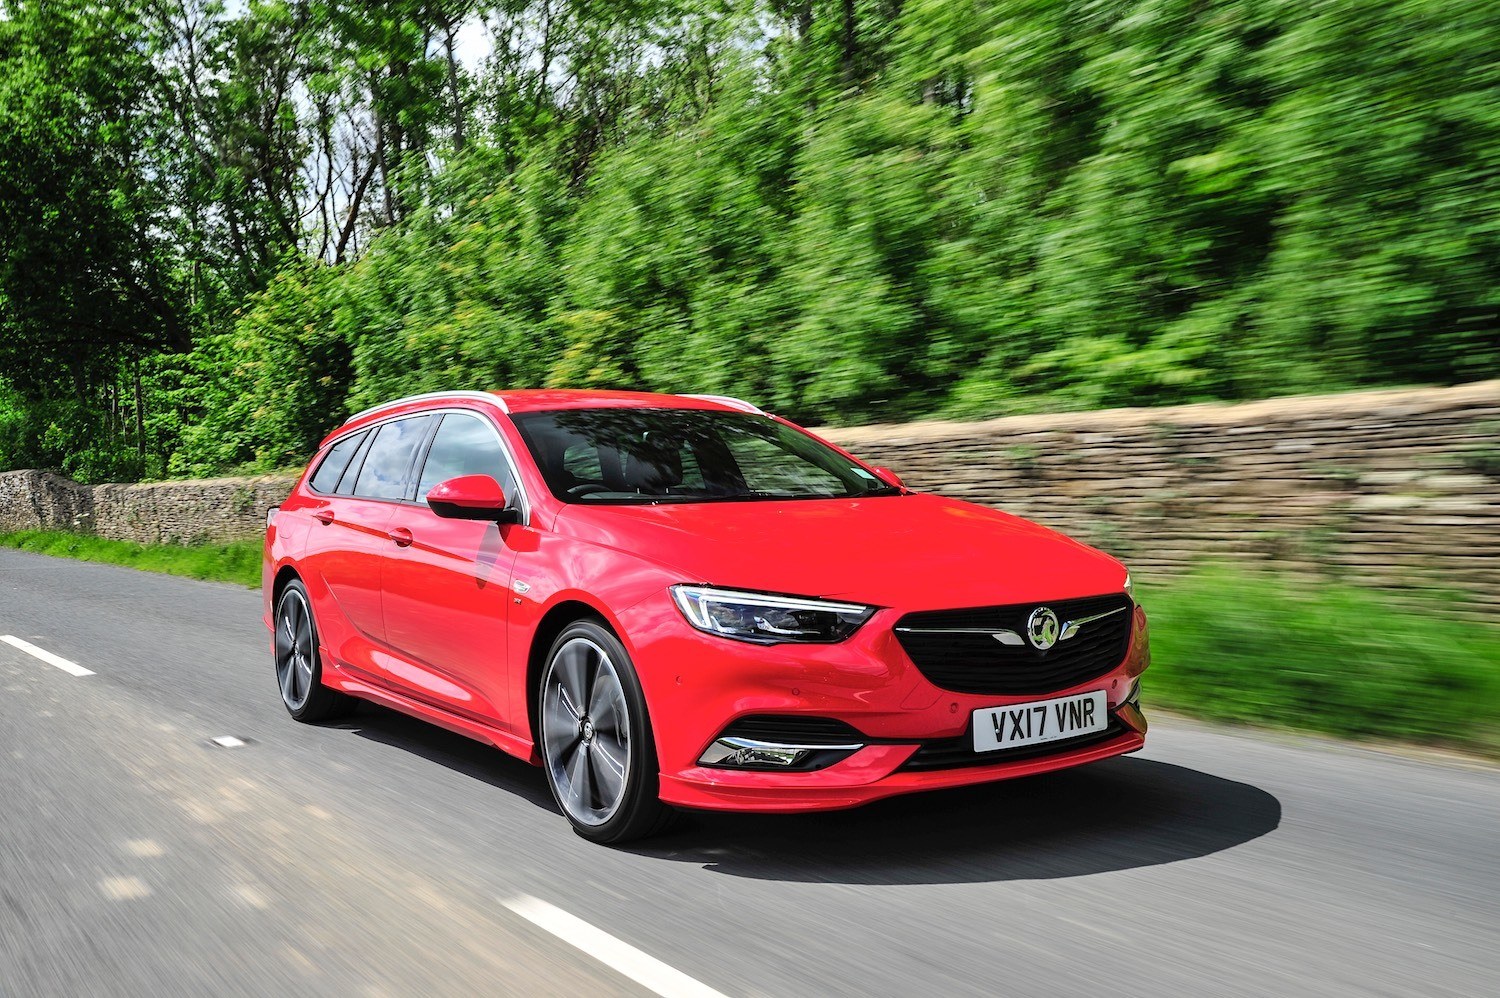 drive-Tom Scanlan Reviews the New Vauxhall Insignia Sports Tourer 1